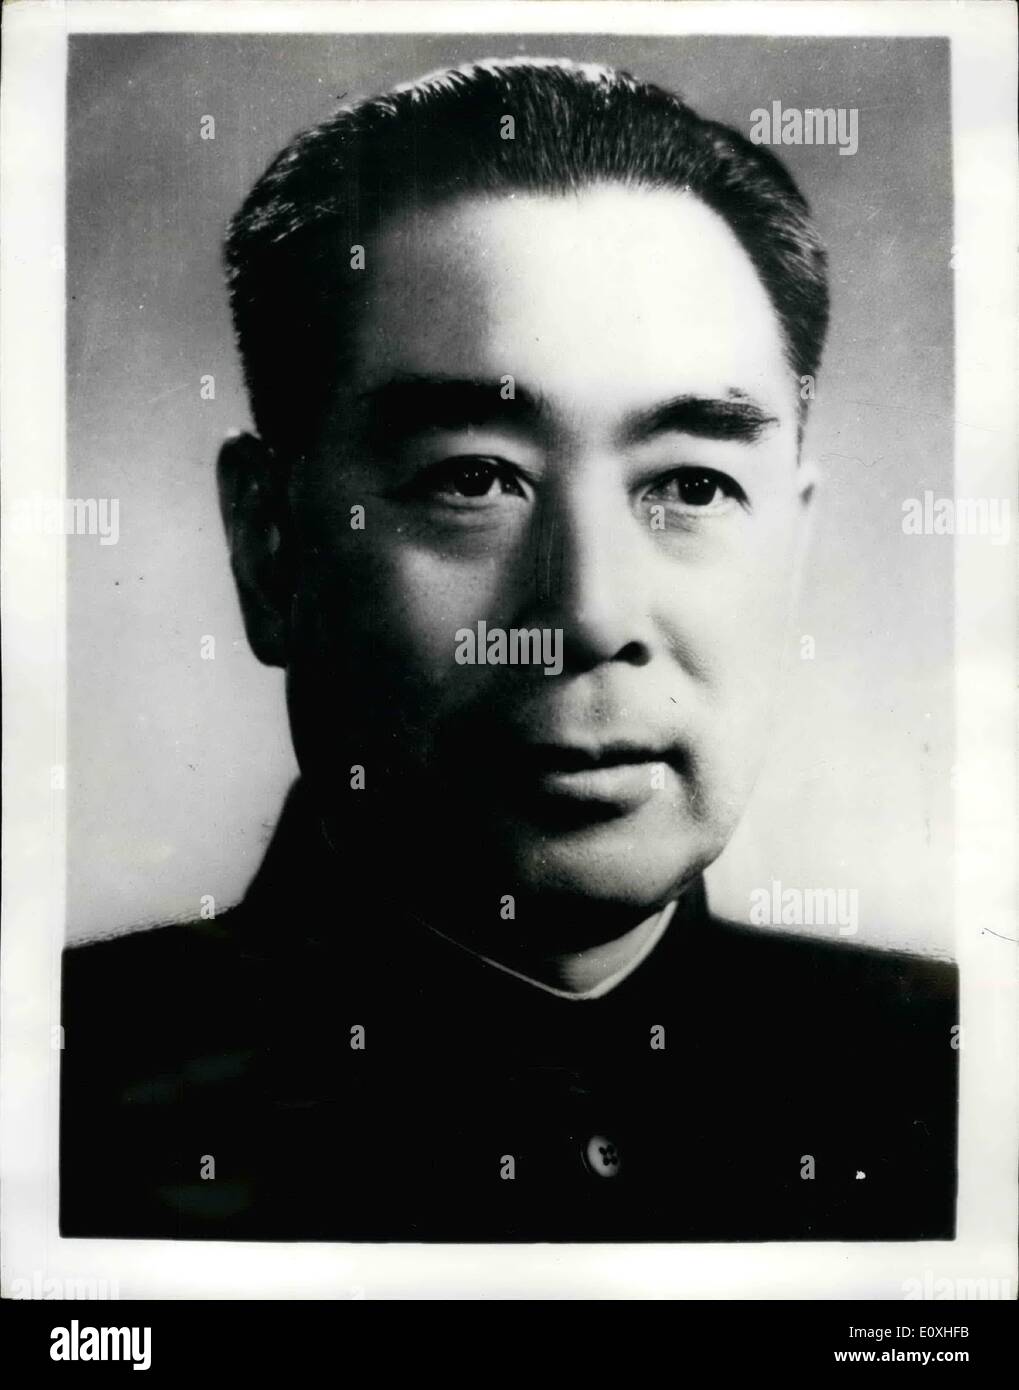 Jan. 01, 1967 - The Struggle for power in China. Chou En Lai. Photo shows Portrait of Chou En Lai, one of the figures in the struggle for power in china. Stock Photo